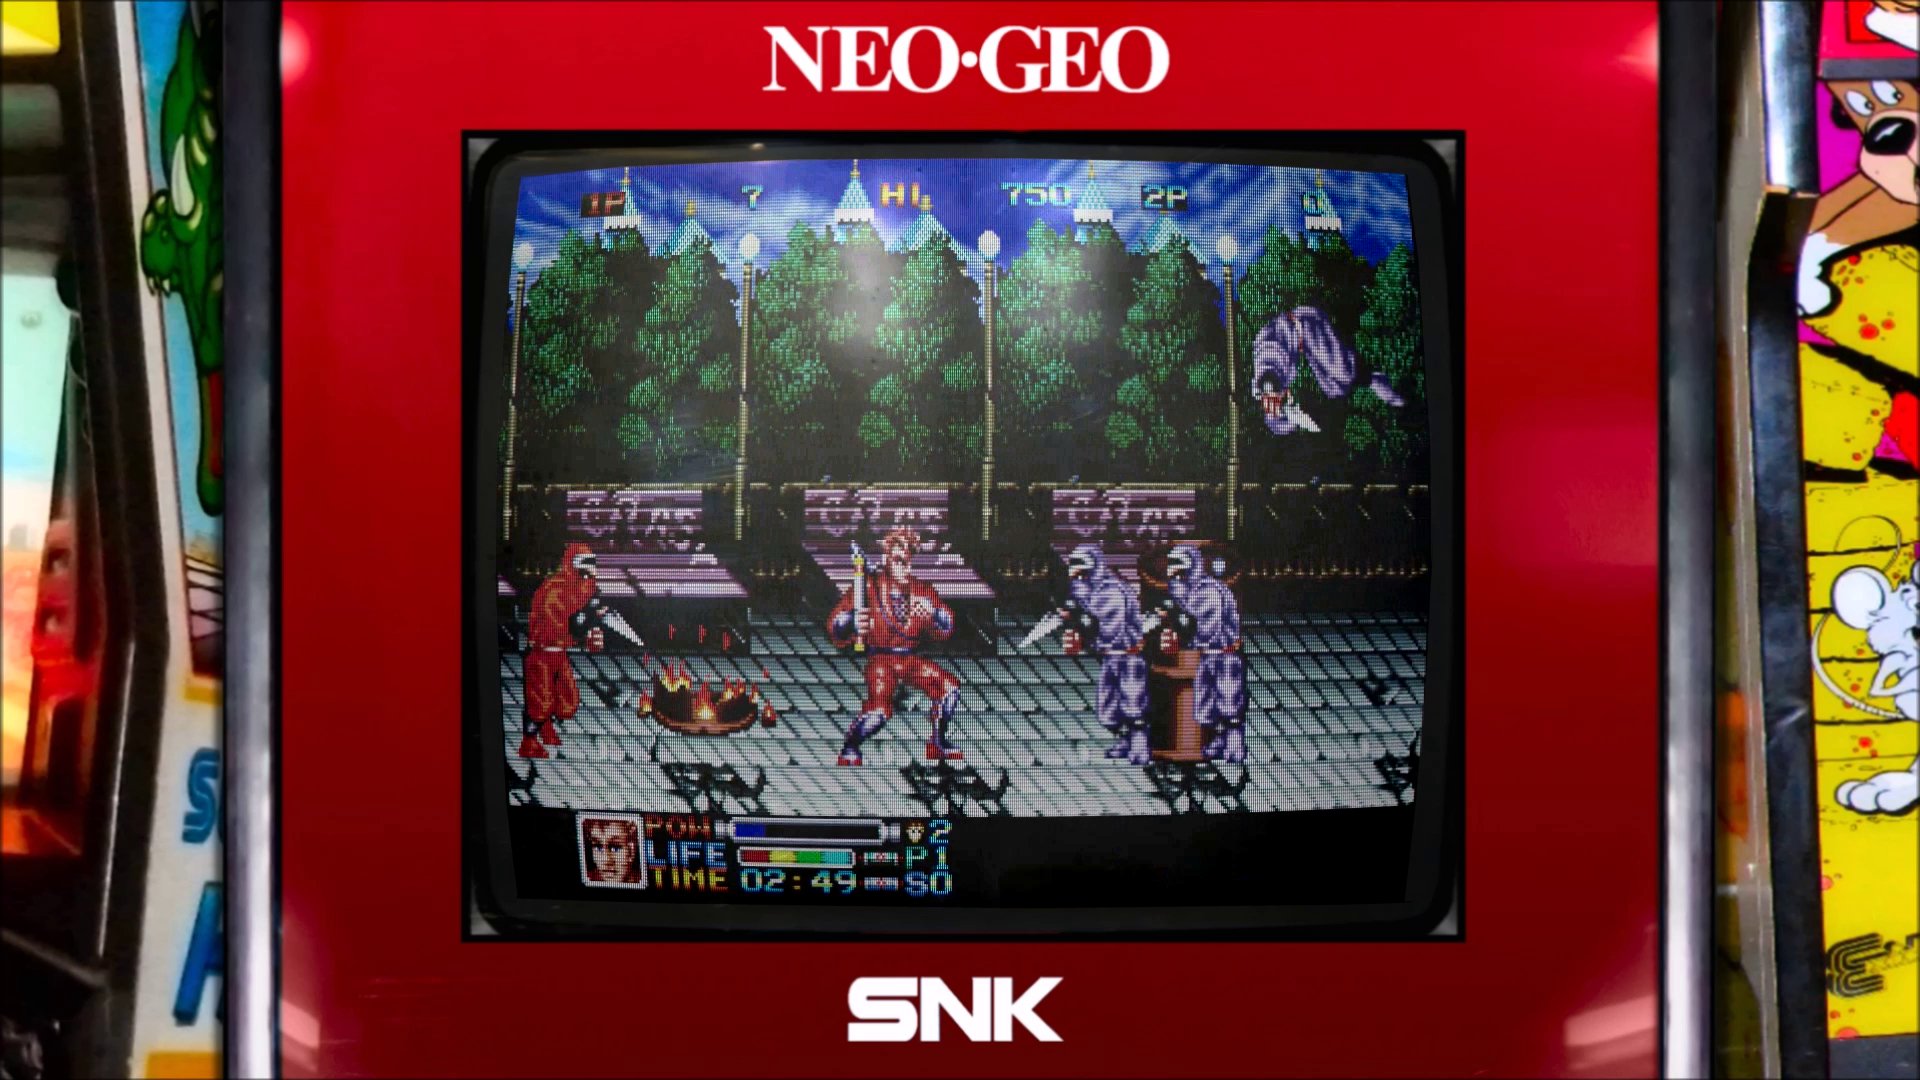 “Here are some #NeoGeo #Arcade Bezels by request. 
https://t.co/ZkH...